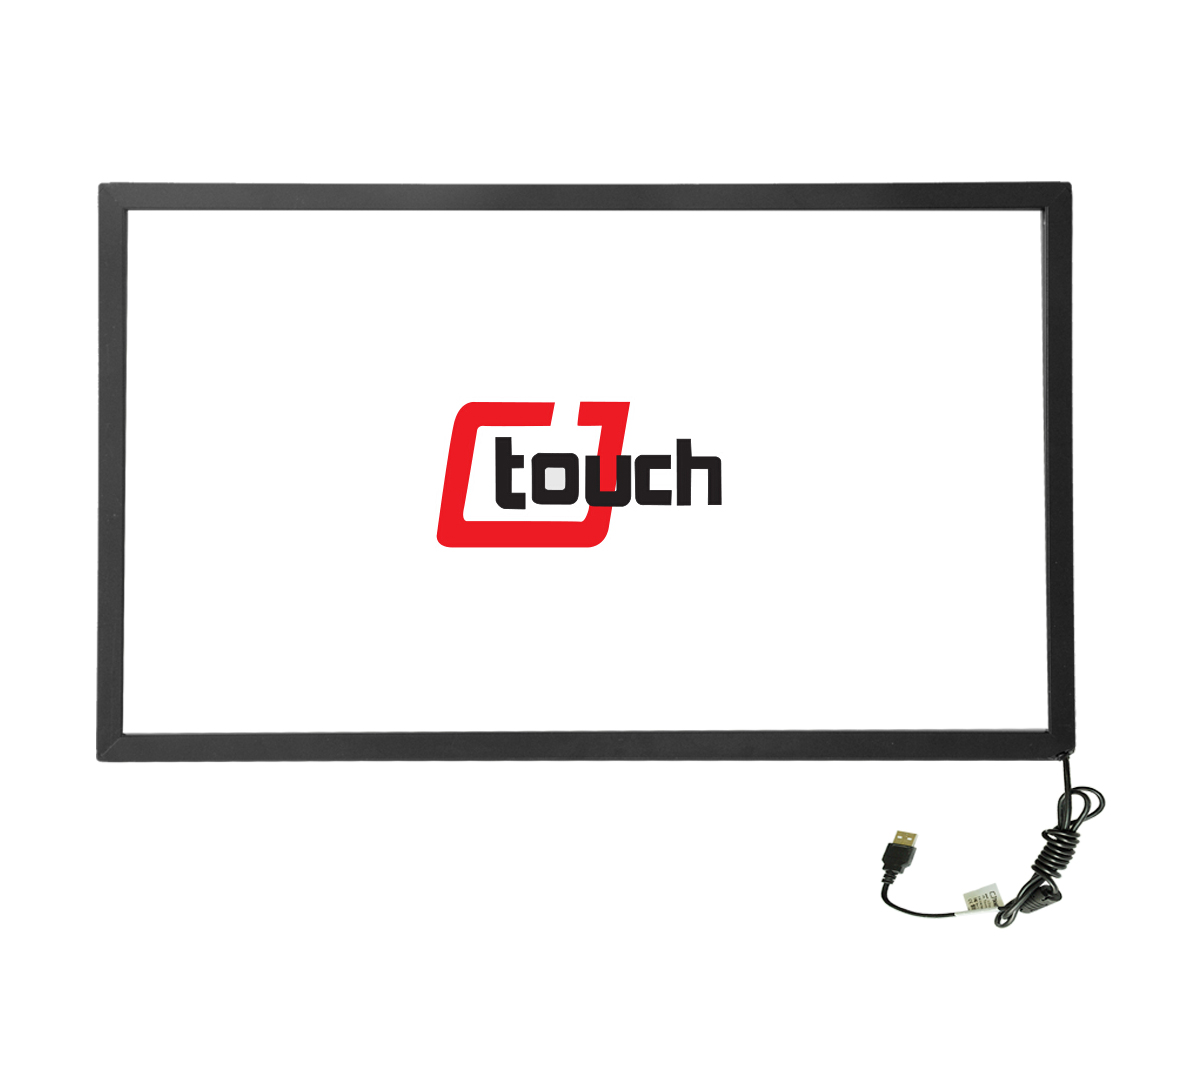 https://www.cjtouch.com/high-quality-multi-points-ir-21-5-inch-infrared-touchscreen-frame-kit-product/